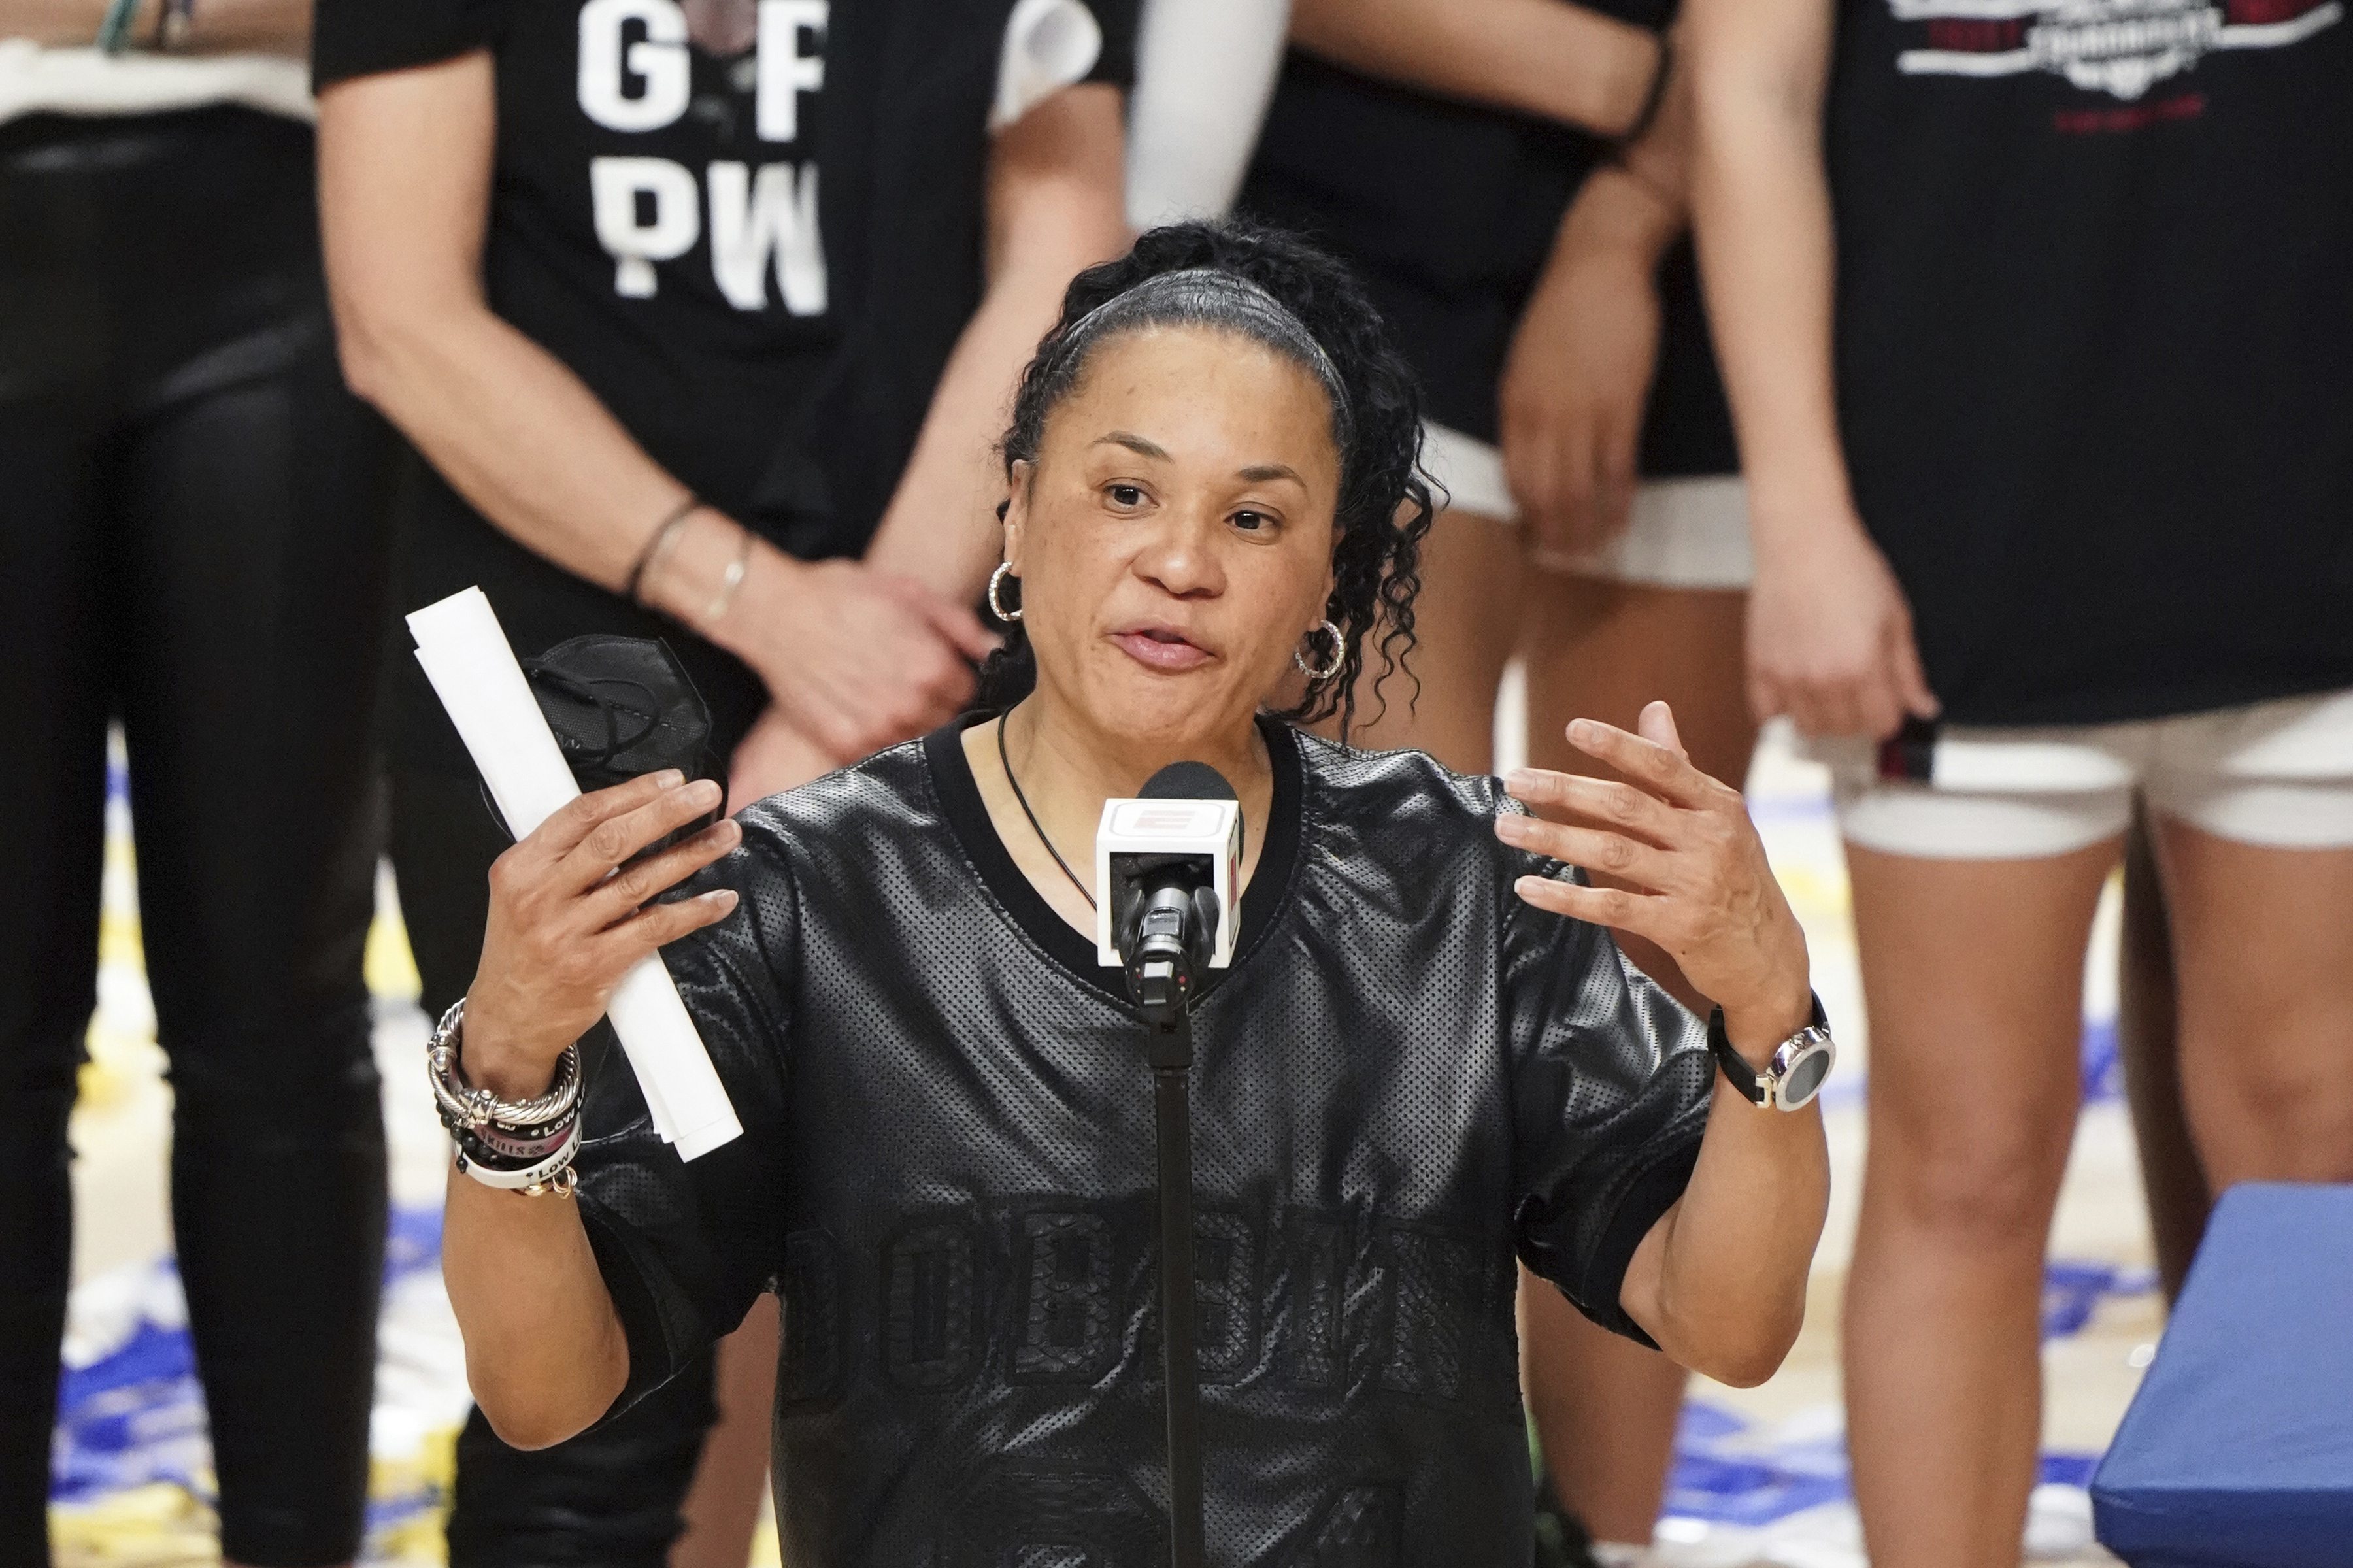 Dawn Staley, UofSC officials address $22.4 million contract deal